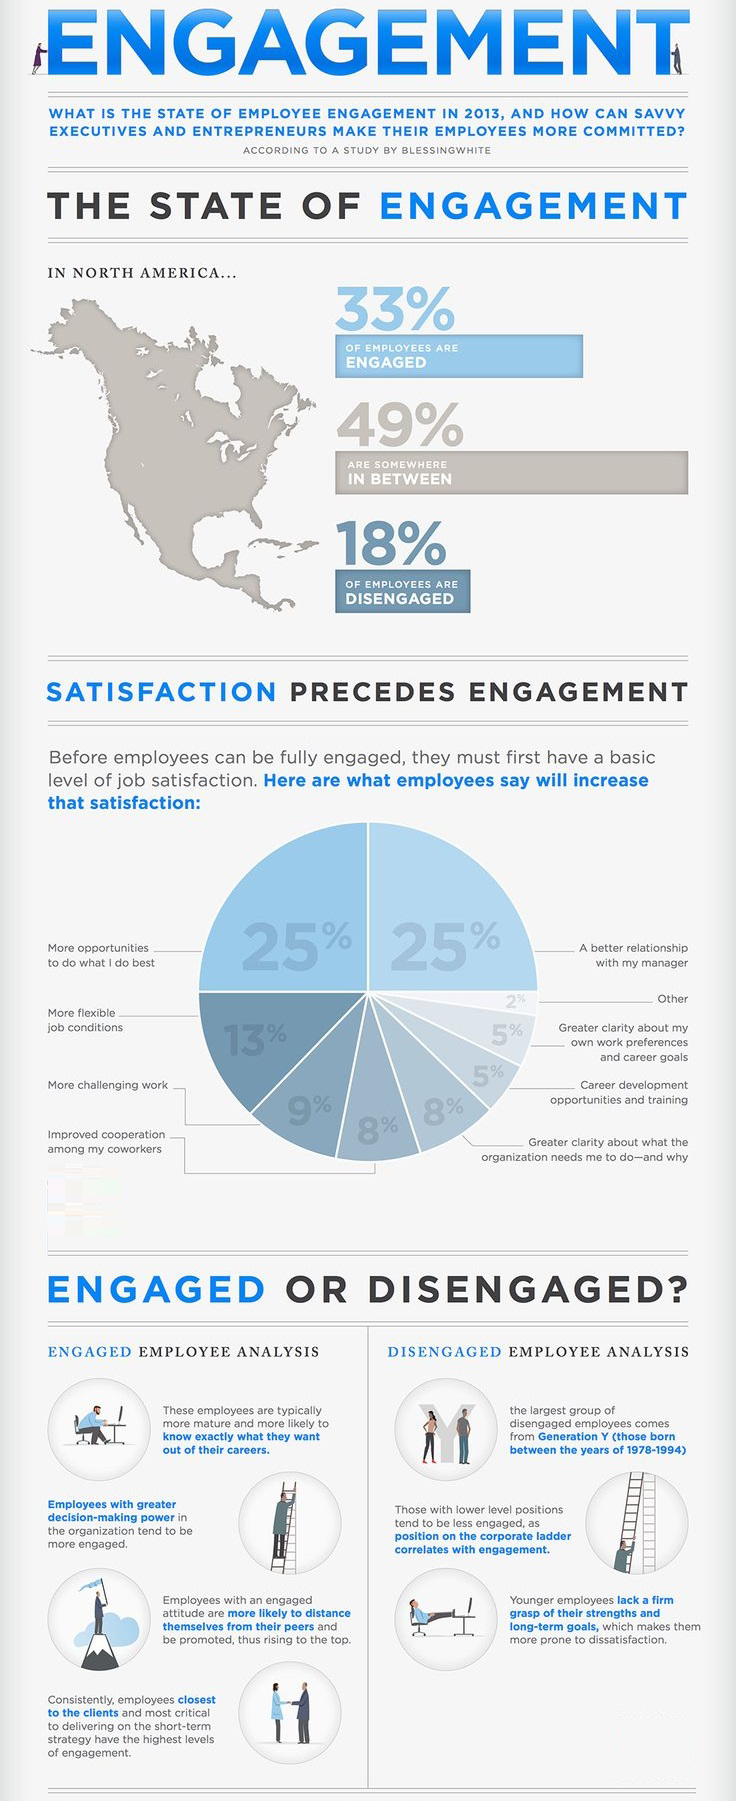 Employee Engagement is key to Employee Retention